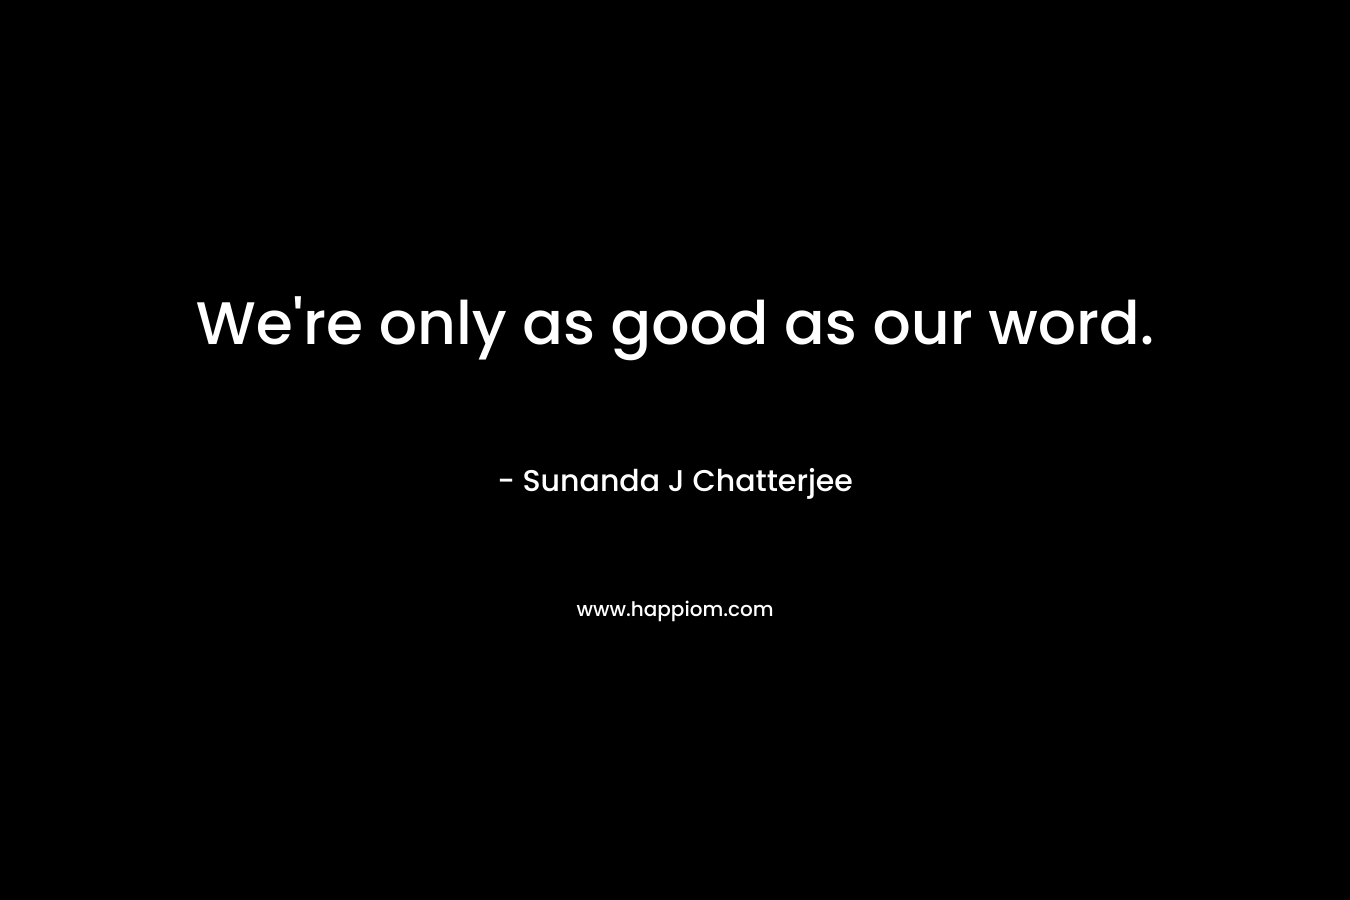 We’re only as good as our word. – Sunanda J Chatterjee